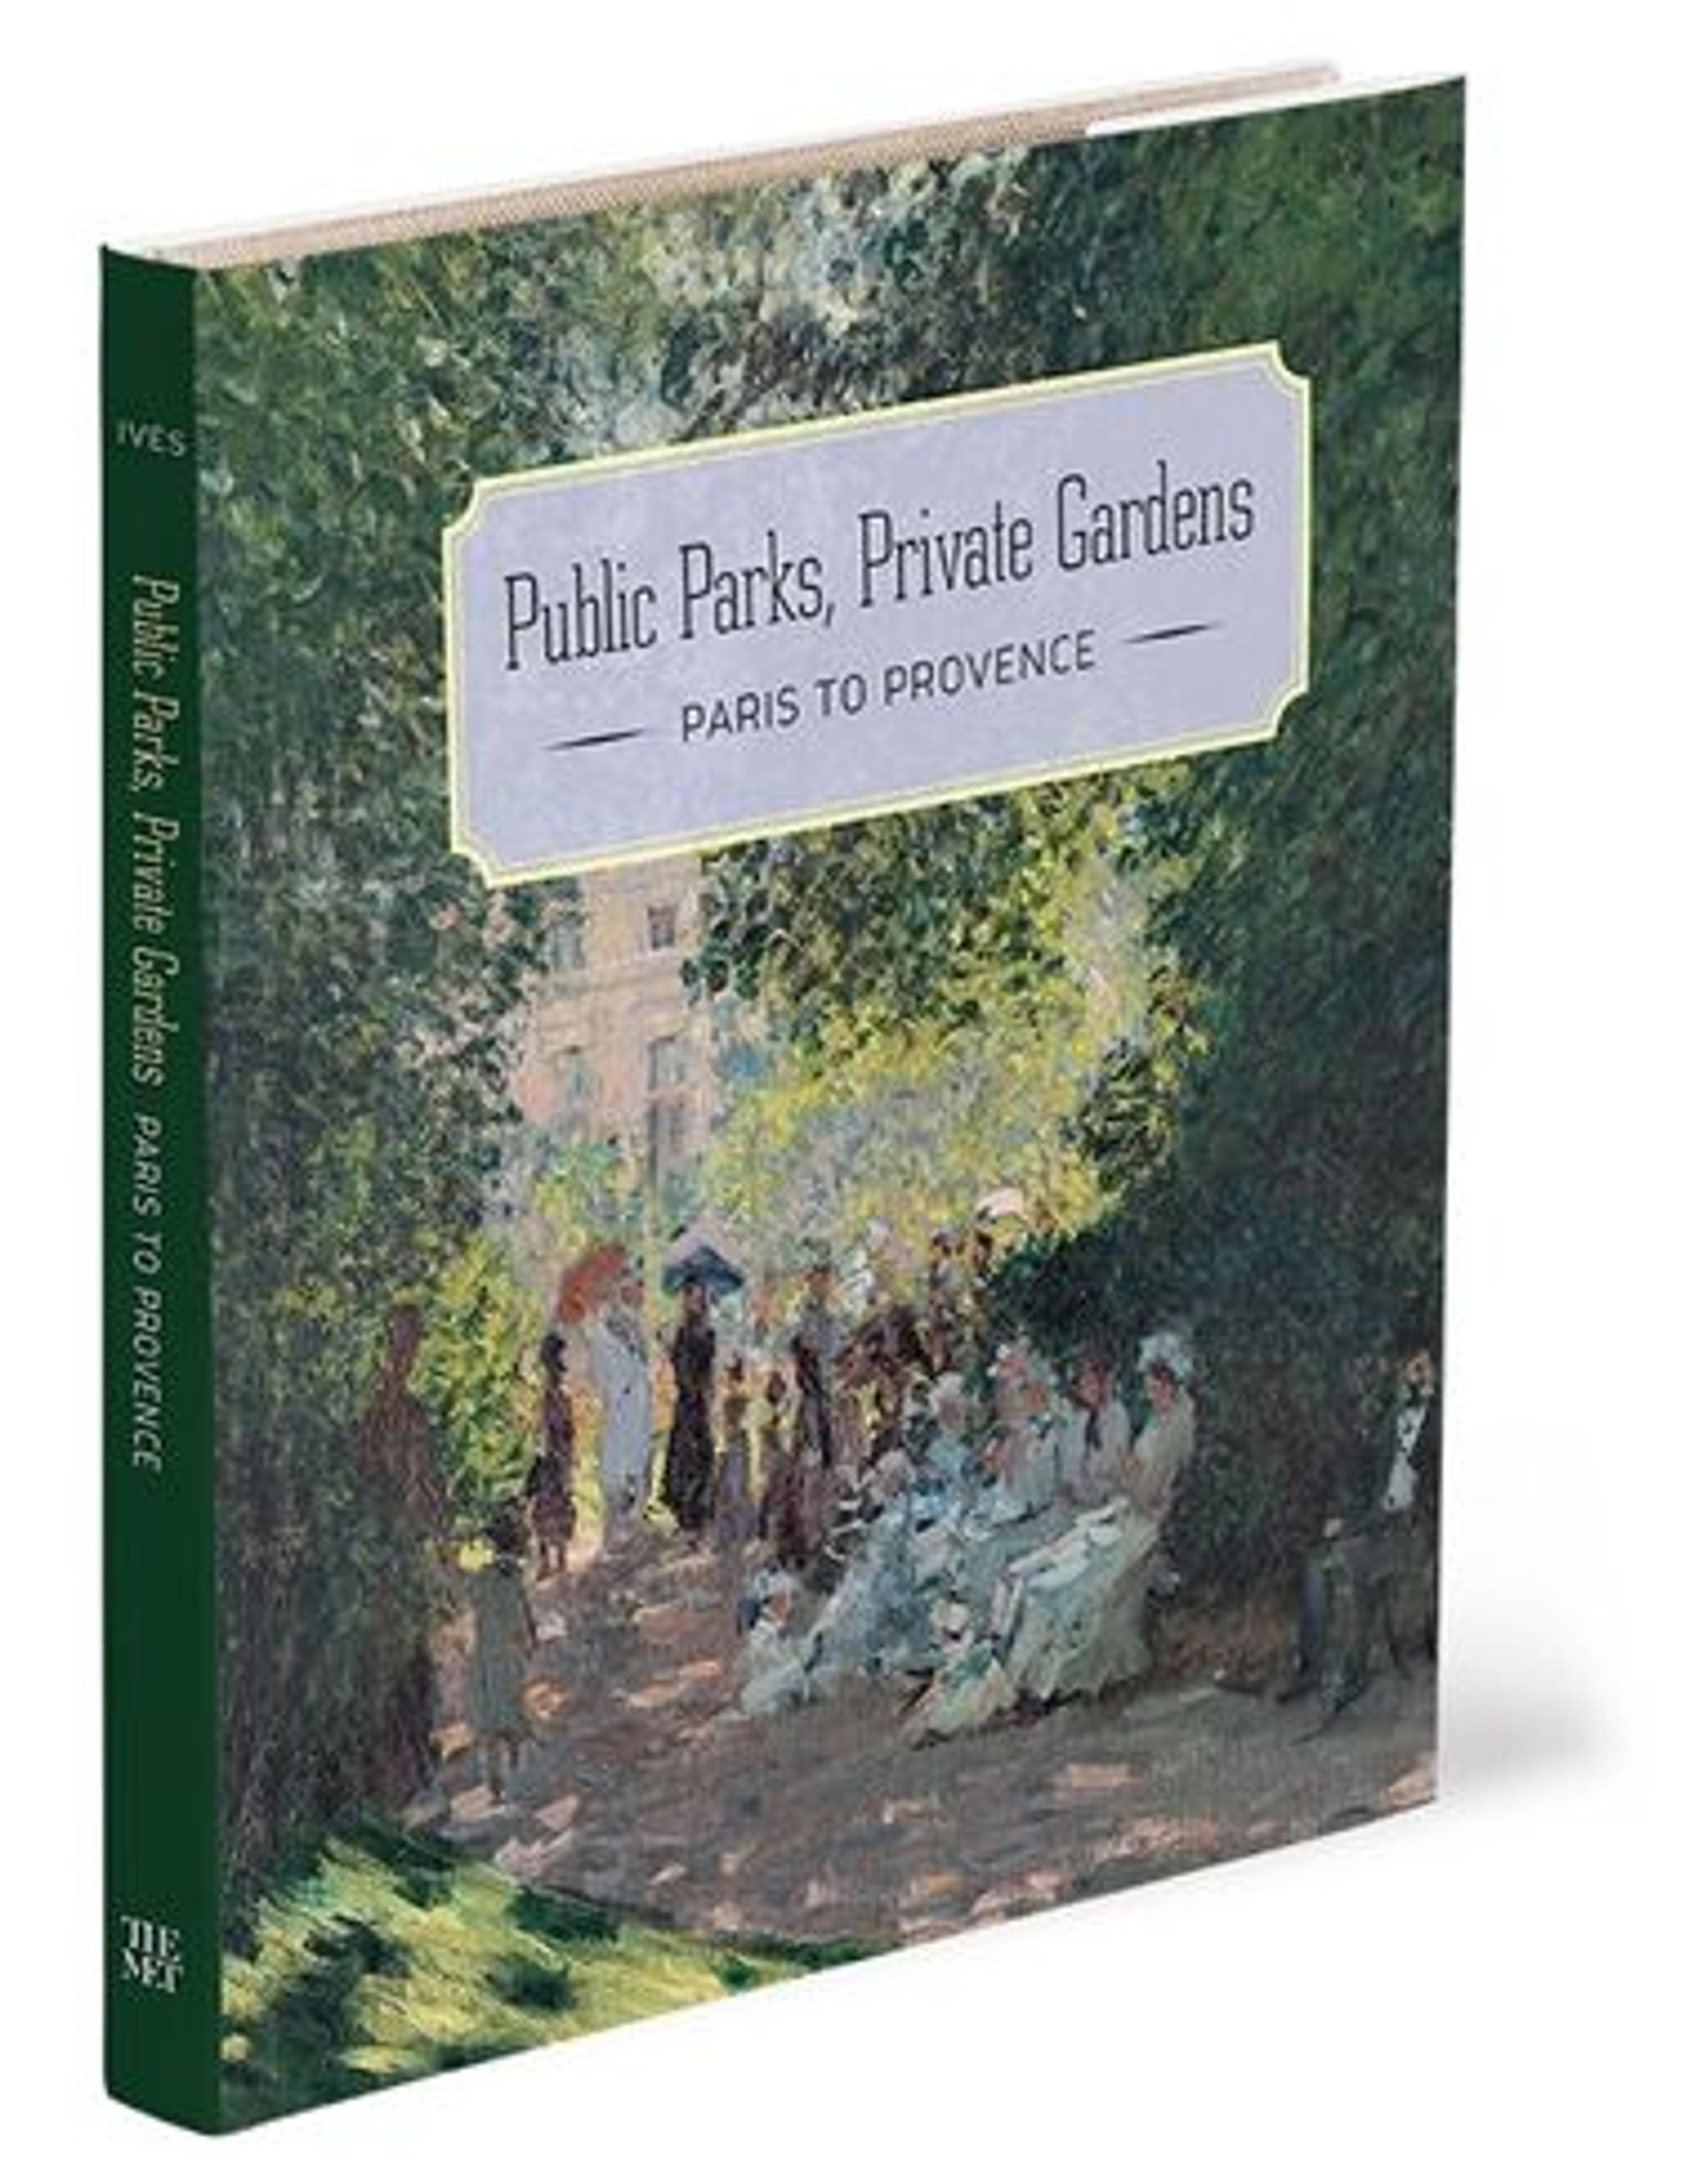 Cover of the book "Public Parks, Private Gardens: Paris to Provence" by Colta Ives